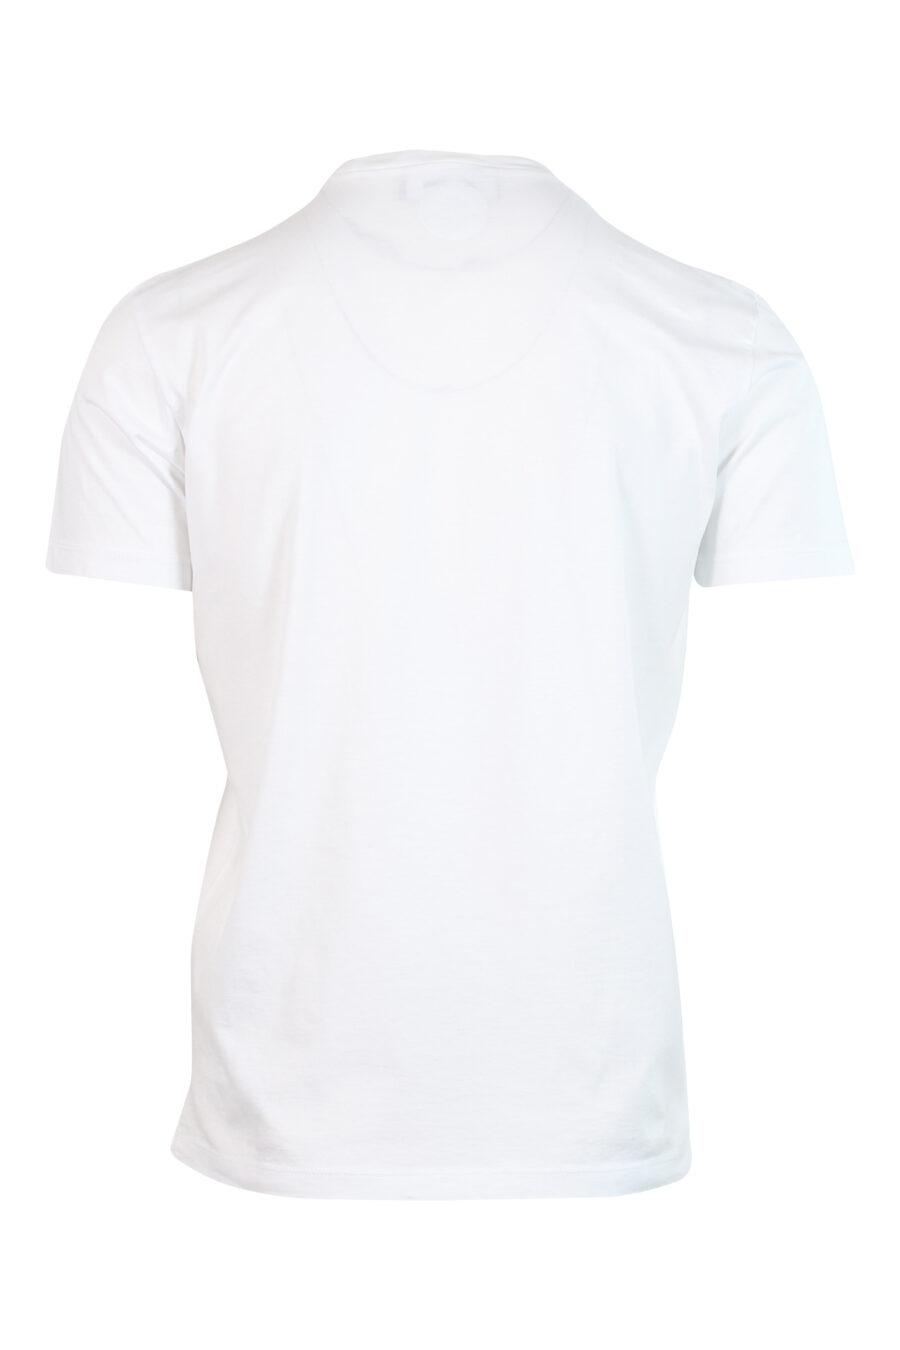 White T-shirt with maxilogo graphic leaf outline - 8052134940945 2